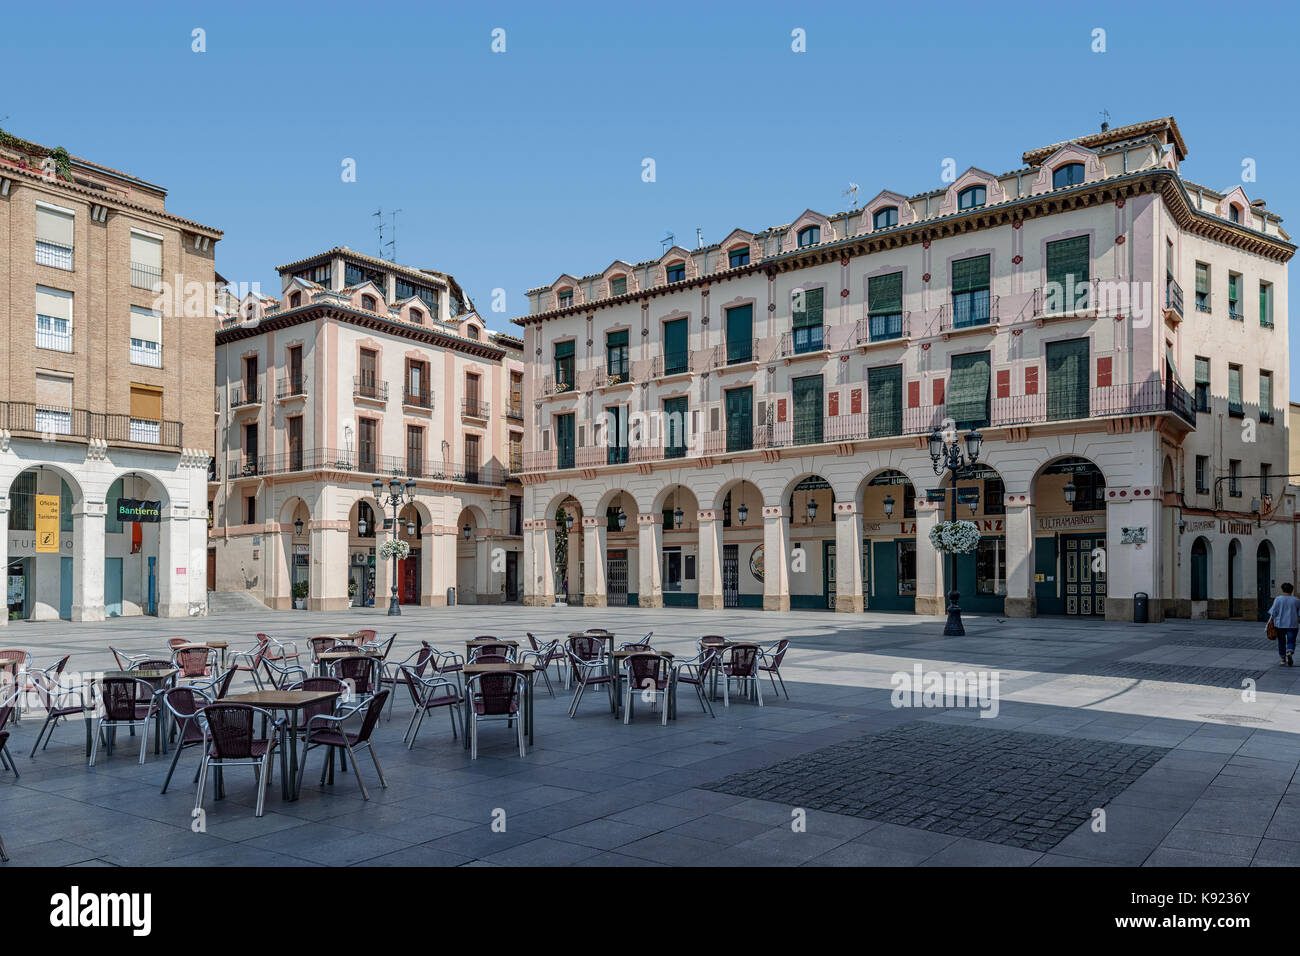 Plaza Luis Lopez Allue in the city of Huesca, Aragon, Spain Stock Photo